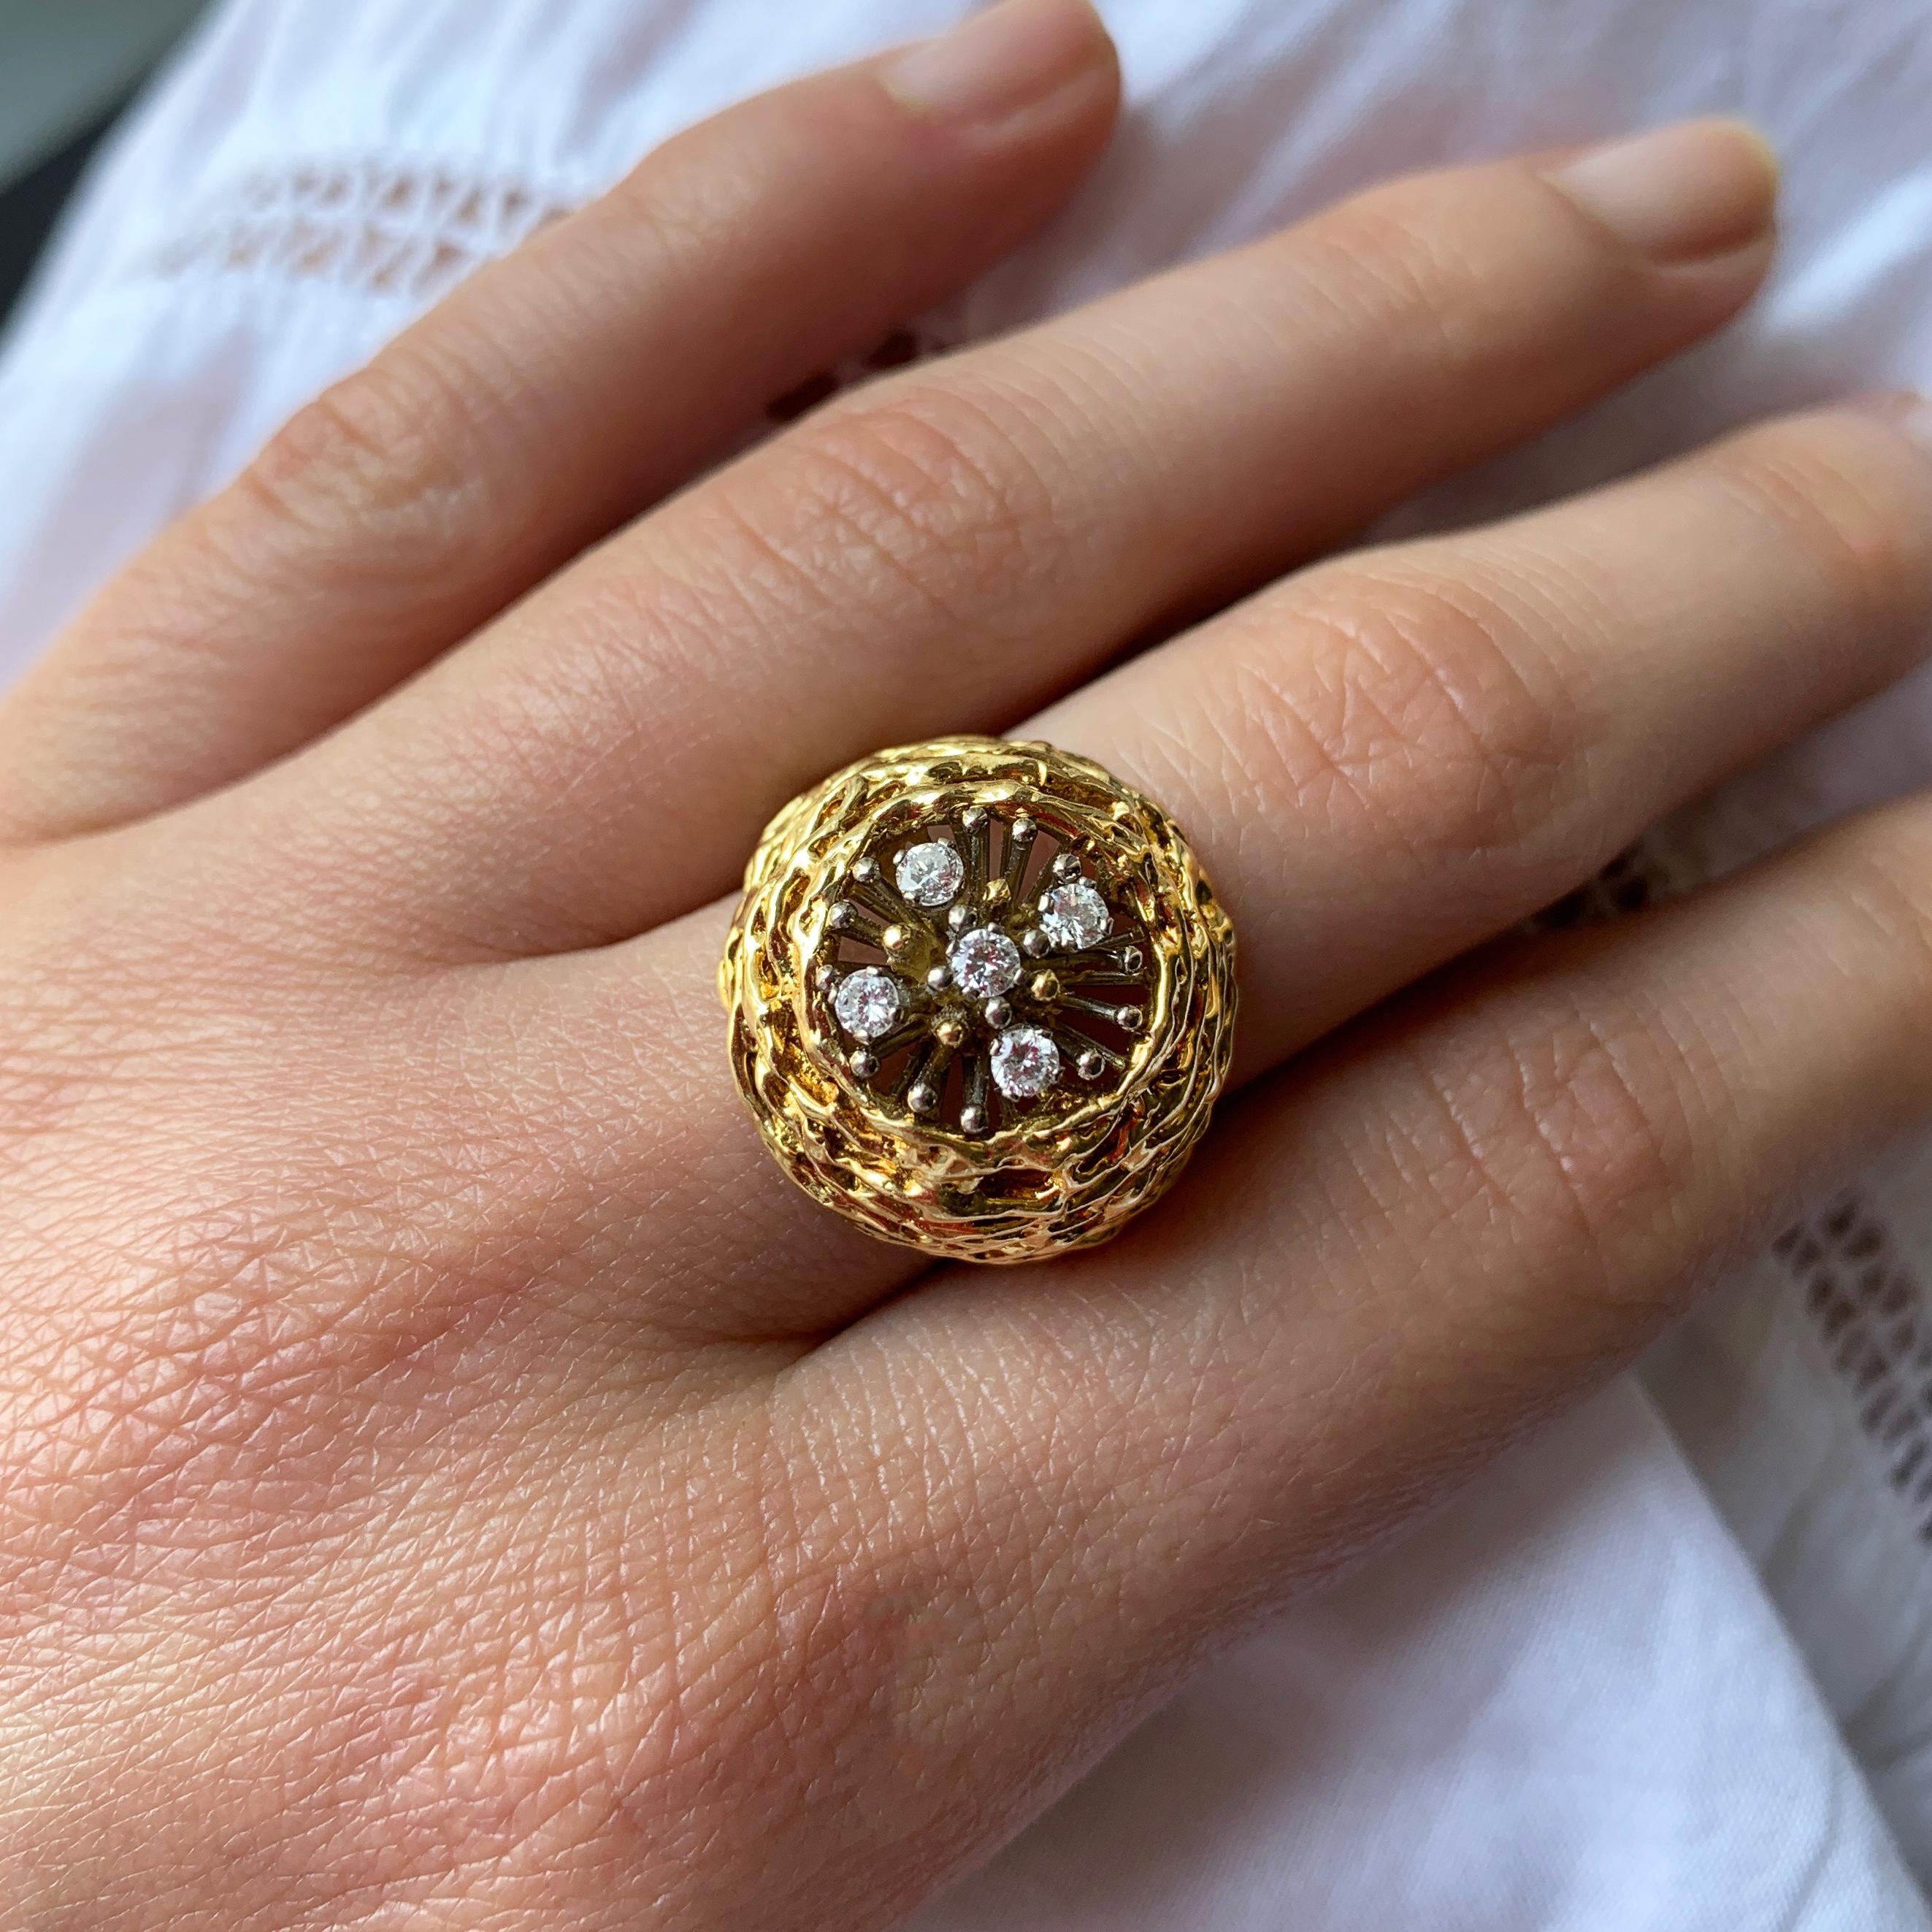 A diamond and 18 karat gold ring, by David Thomas, 1972. Atlantis collection, limited edition for Prestige Jewellers.

Signed David Thomas and numbered 25. Stamped with London hallmarks. Total diamond weight approximately 0.15-0.2 carats.

Ring size